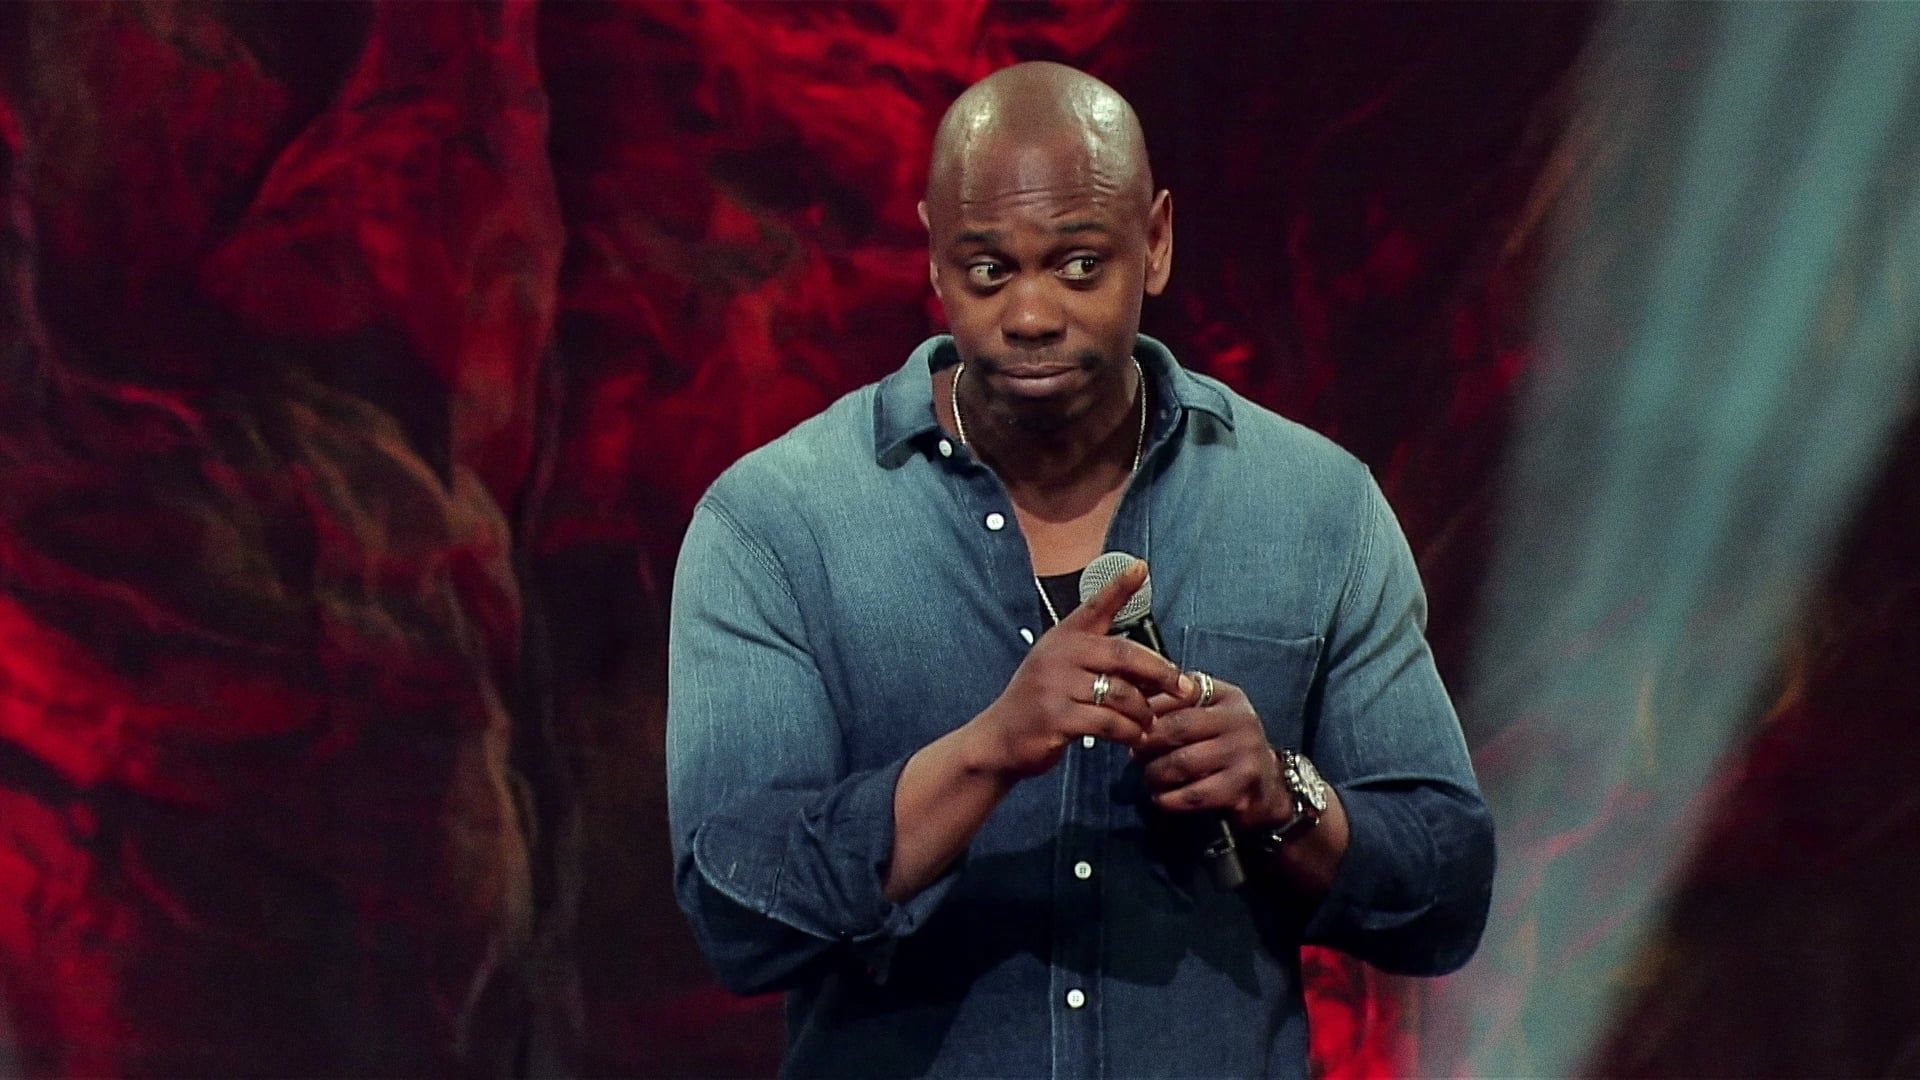 Dave Chappelle background